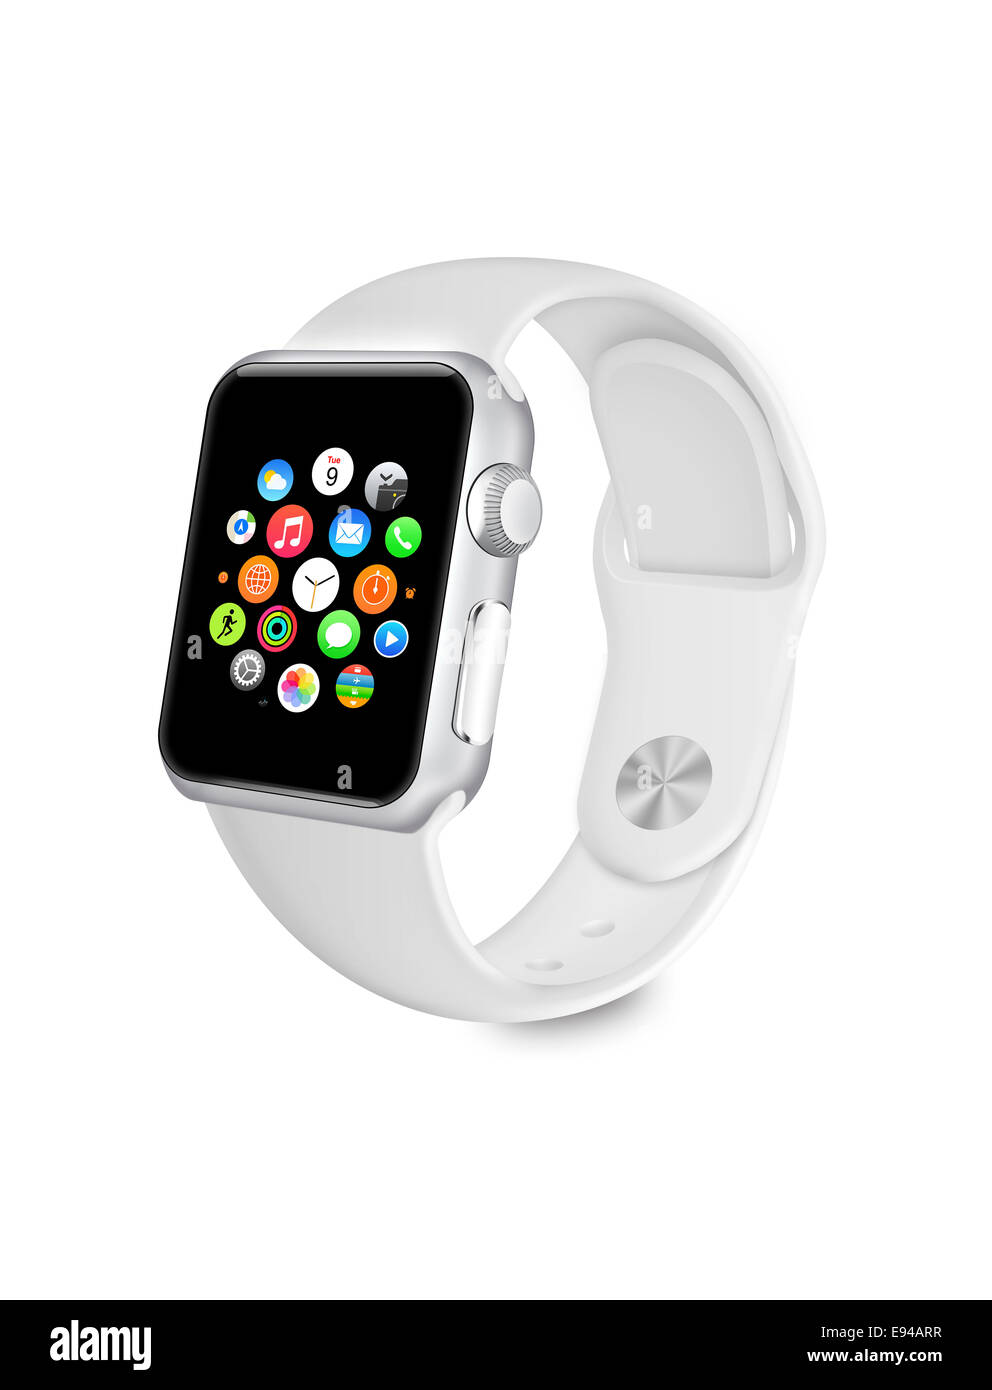 Apple Watch Iwatch Home Screen High Resolution Stock Photography And Images Alamy